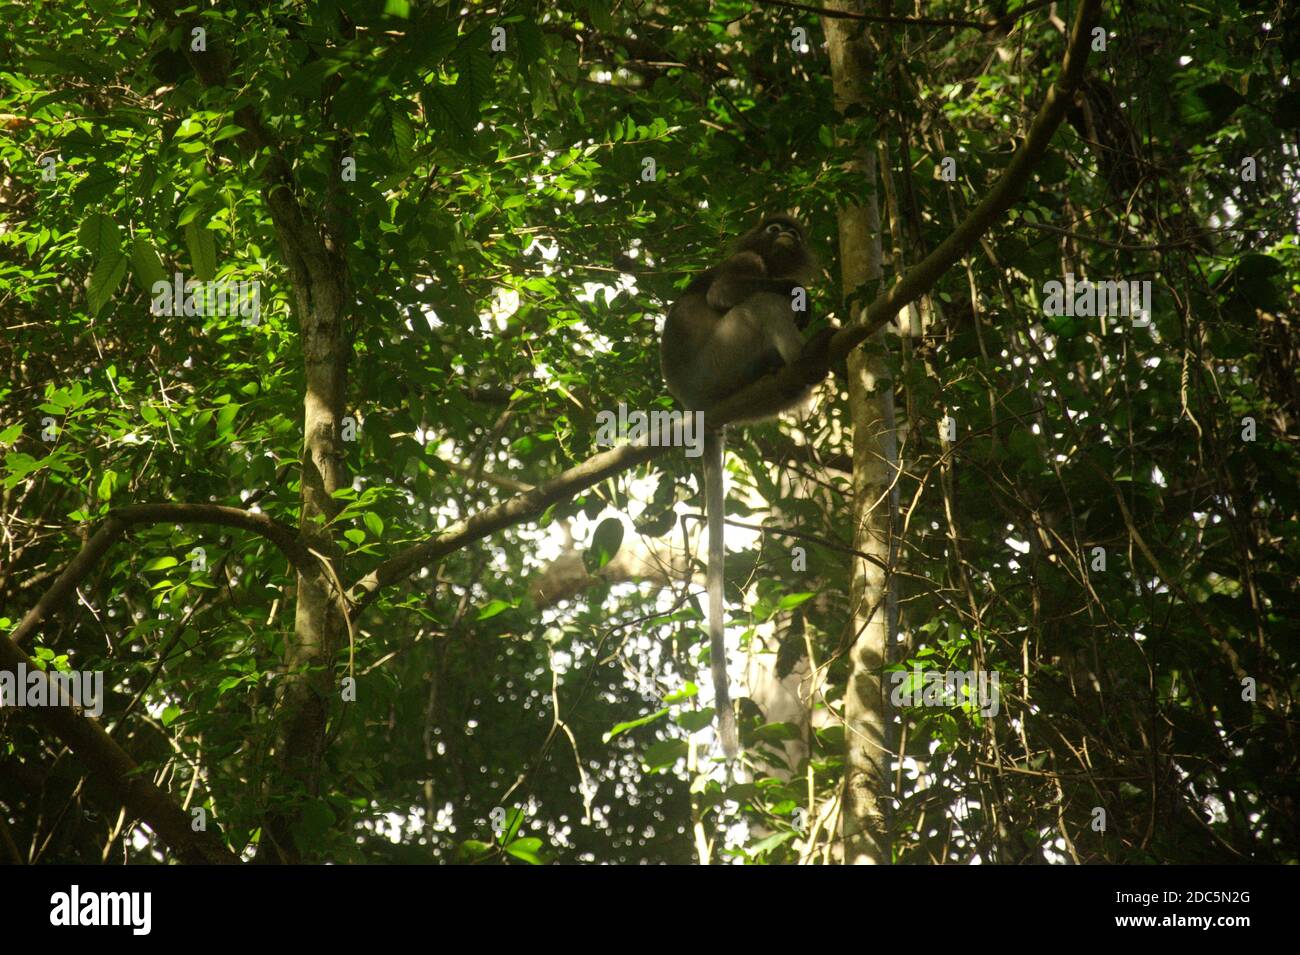 a white face dusky leaf monkey sitting on top of the tree in the forest Stock Photo